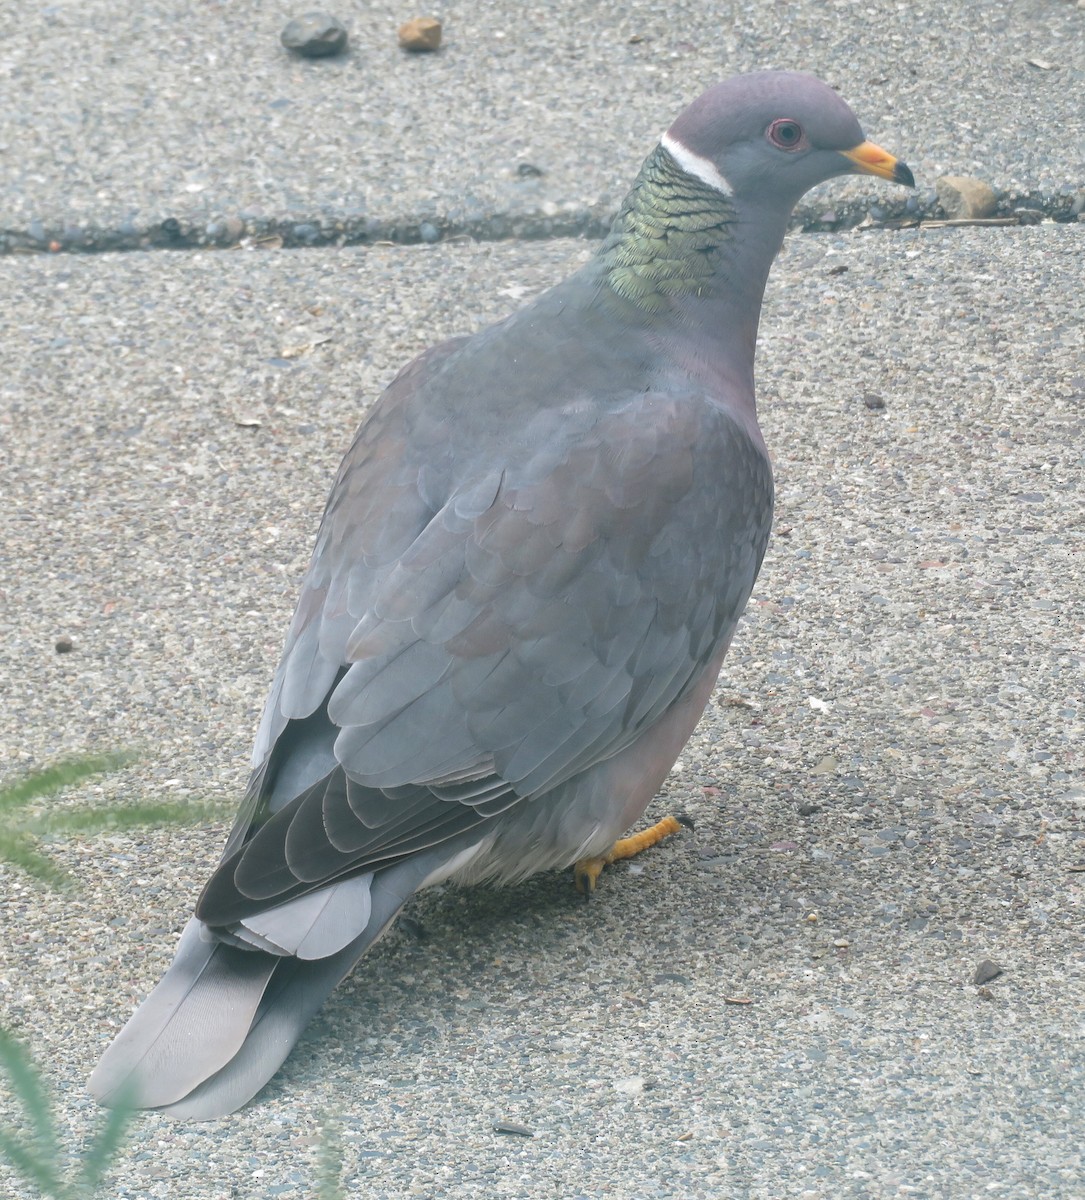 Band-tailed Pigeon - Richard Ackley